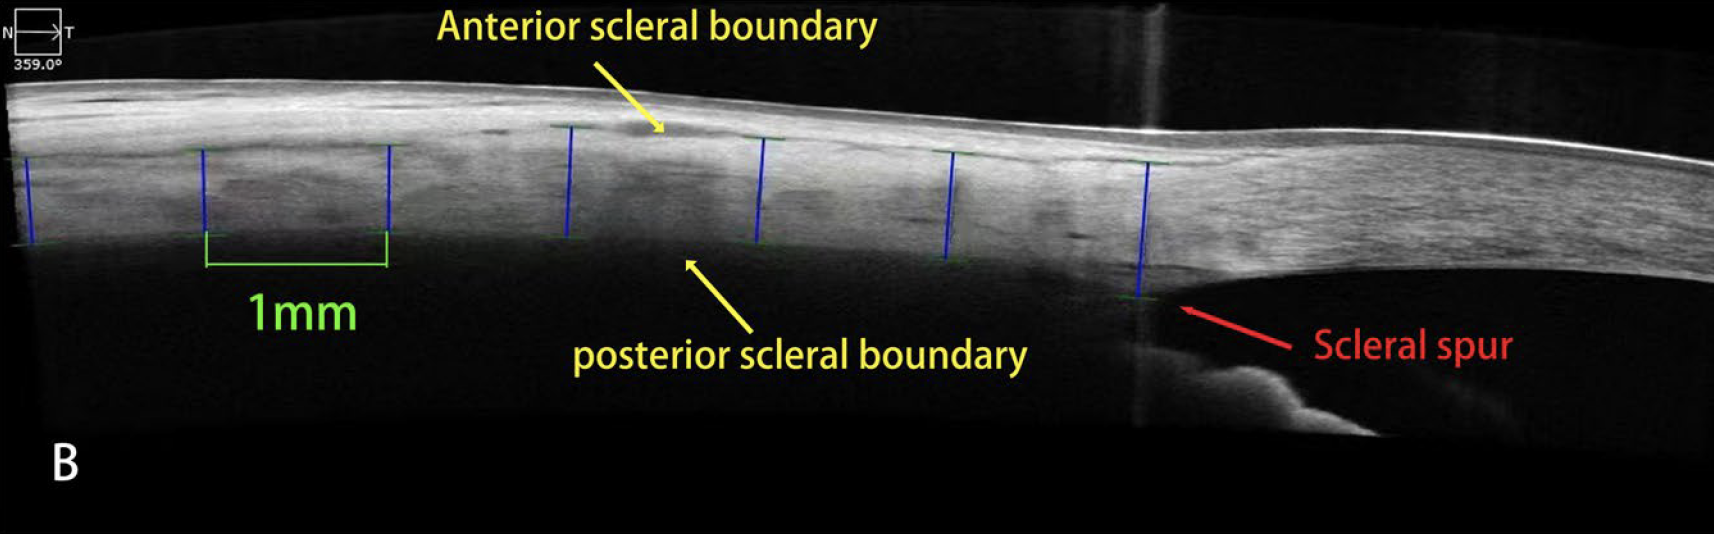 Anterior scleral thickness is negatively correlated with axial length and positively correlated with age.